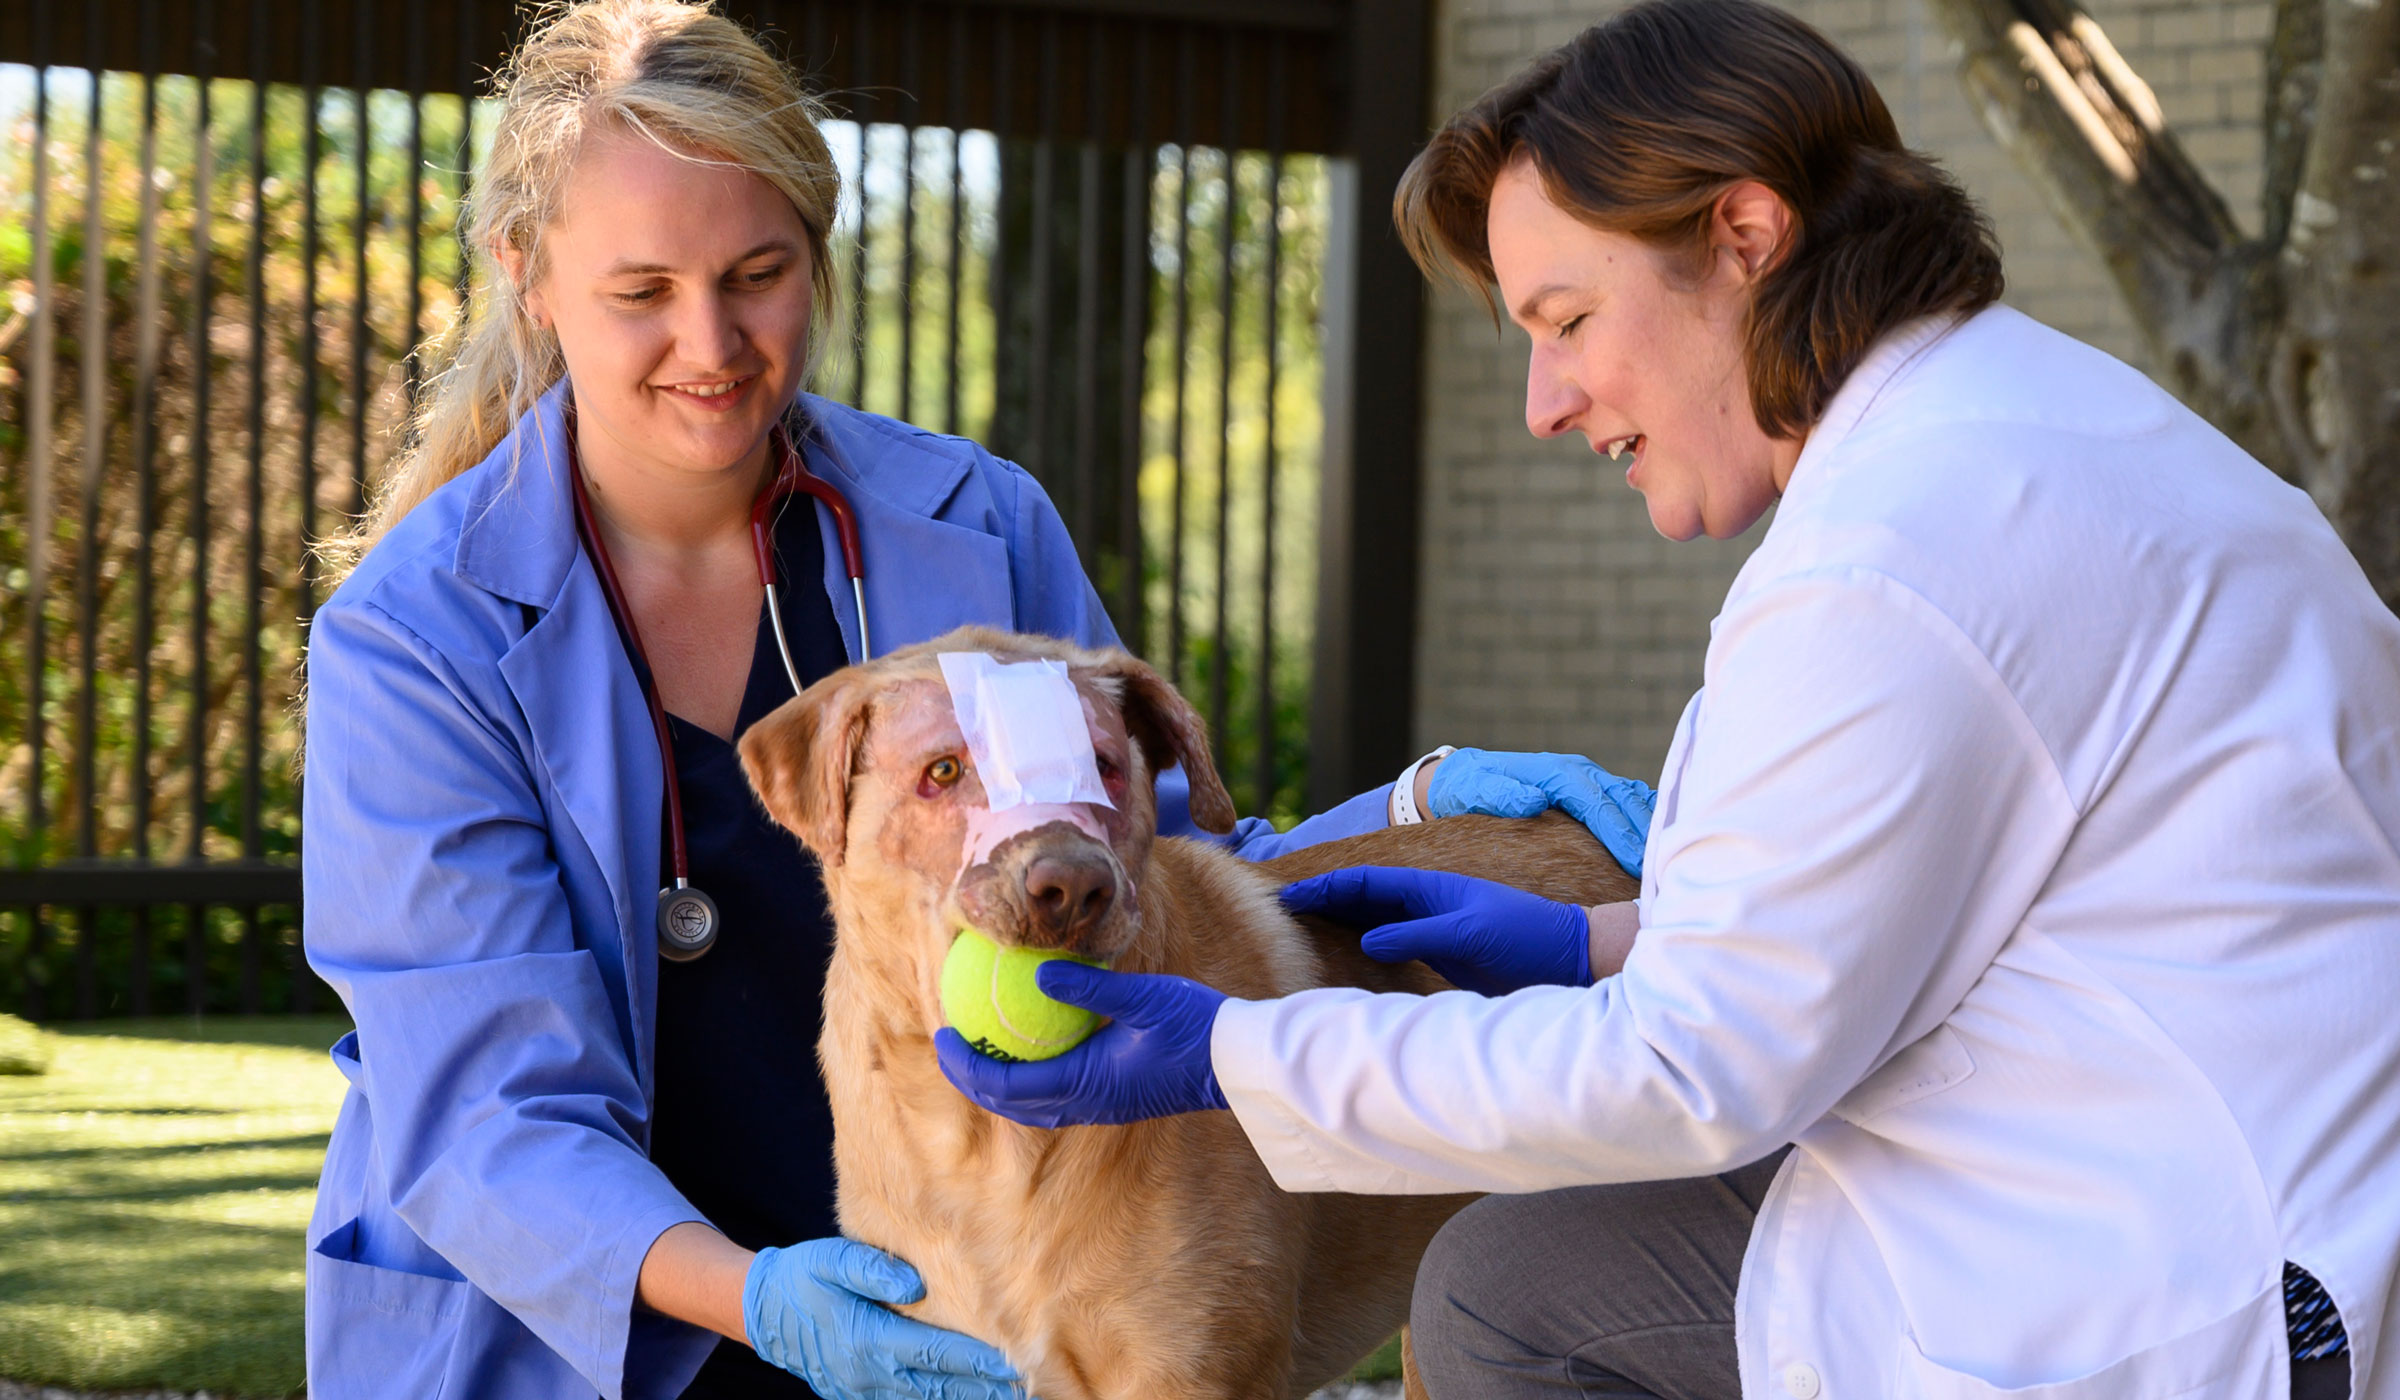 Buddy the beige dog stands with a bandage down the bridge of his nose with the CVM student crouched smiling on the left and Dr. Swanson wearing a white lab coat, crouched and offering a tennis ball to Buddy from the right. 